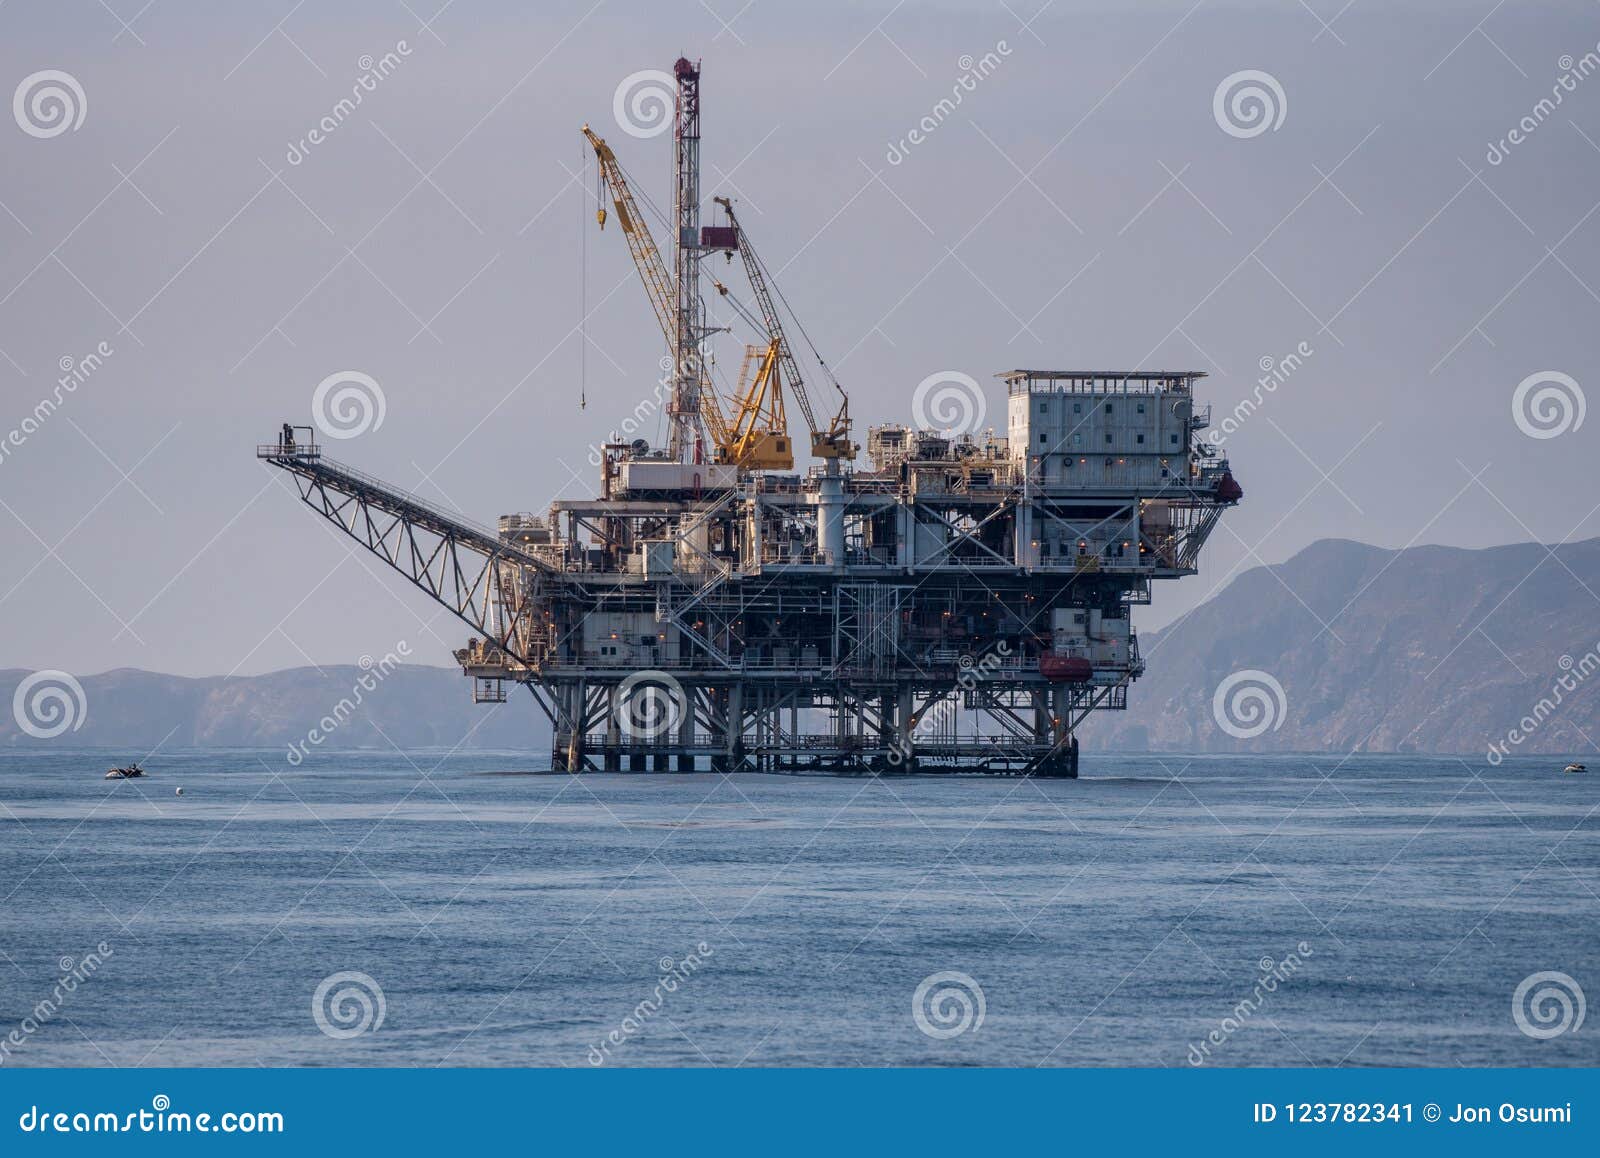 oil production taking place in middle of ocean.